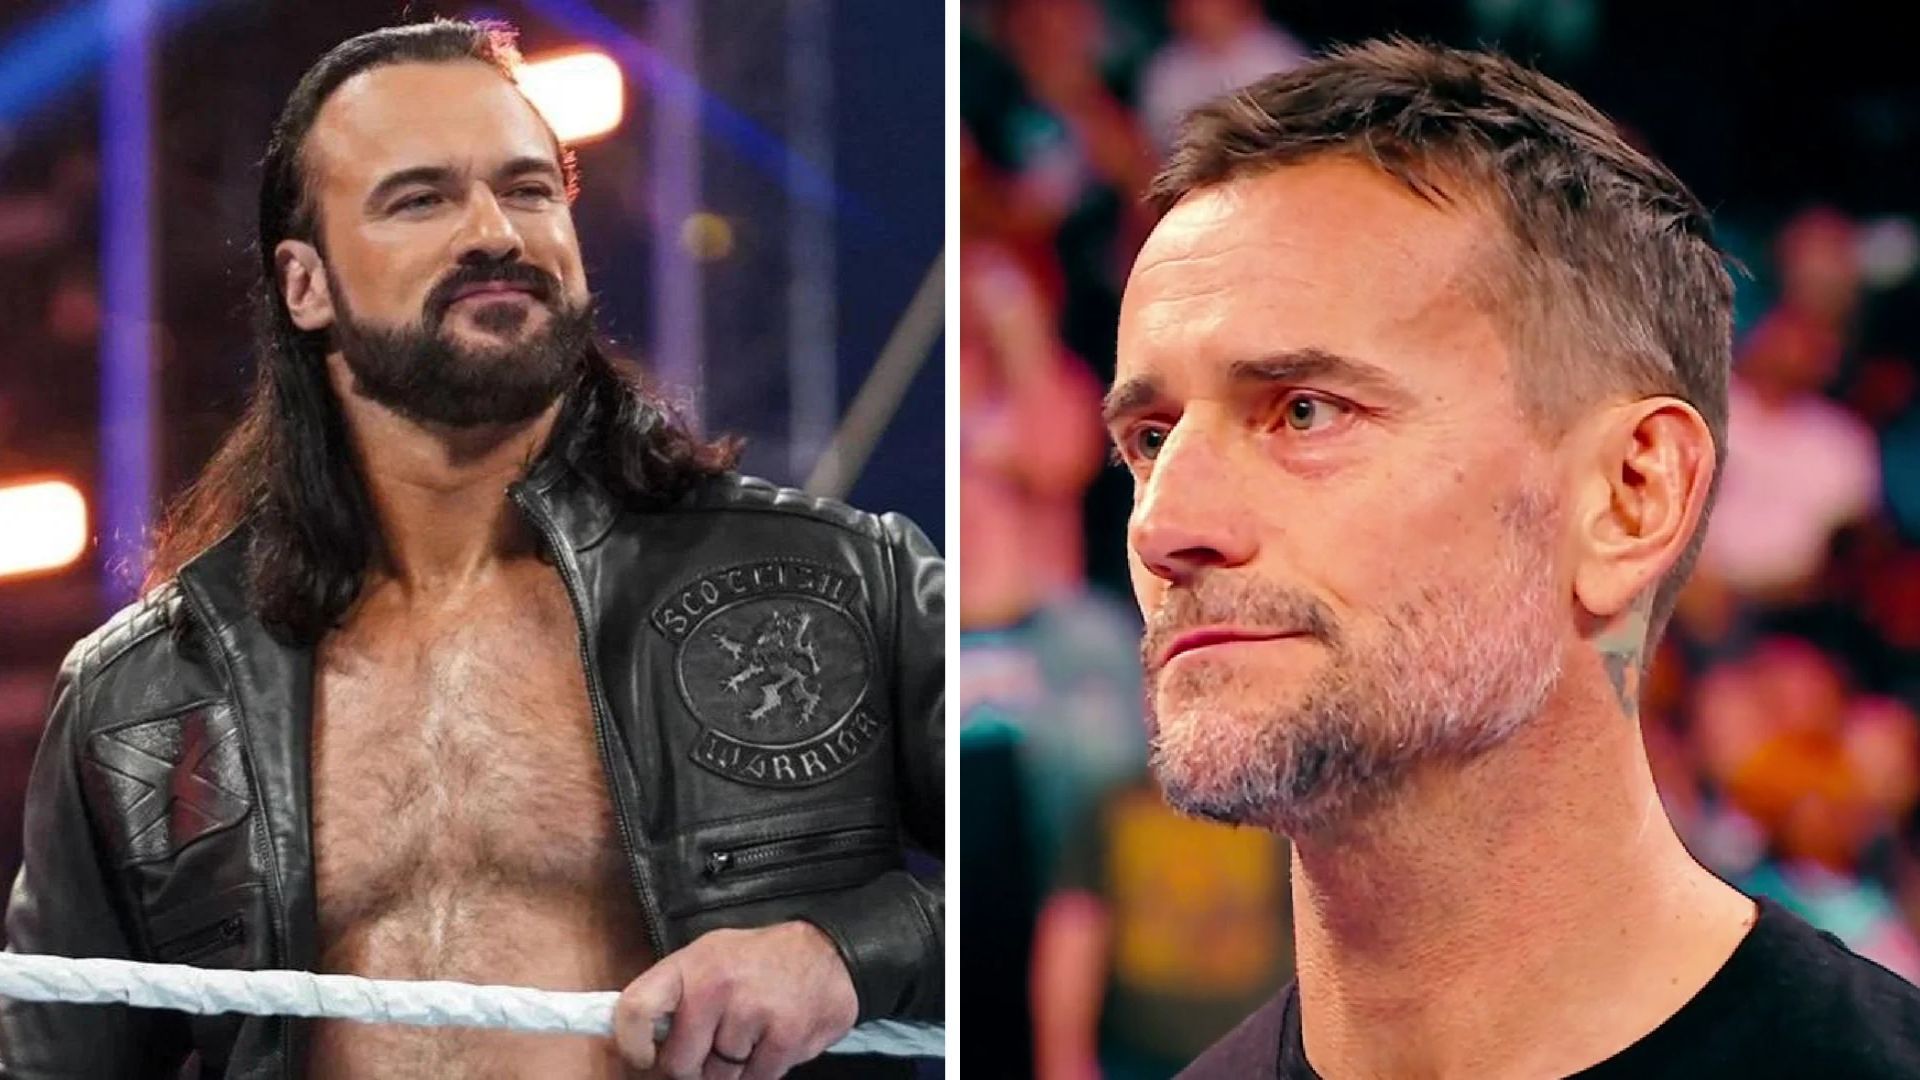 Drew McIntyre on the left and CM Punk on the right